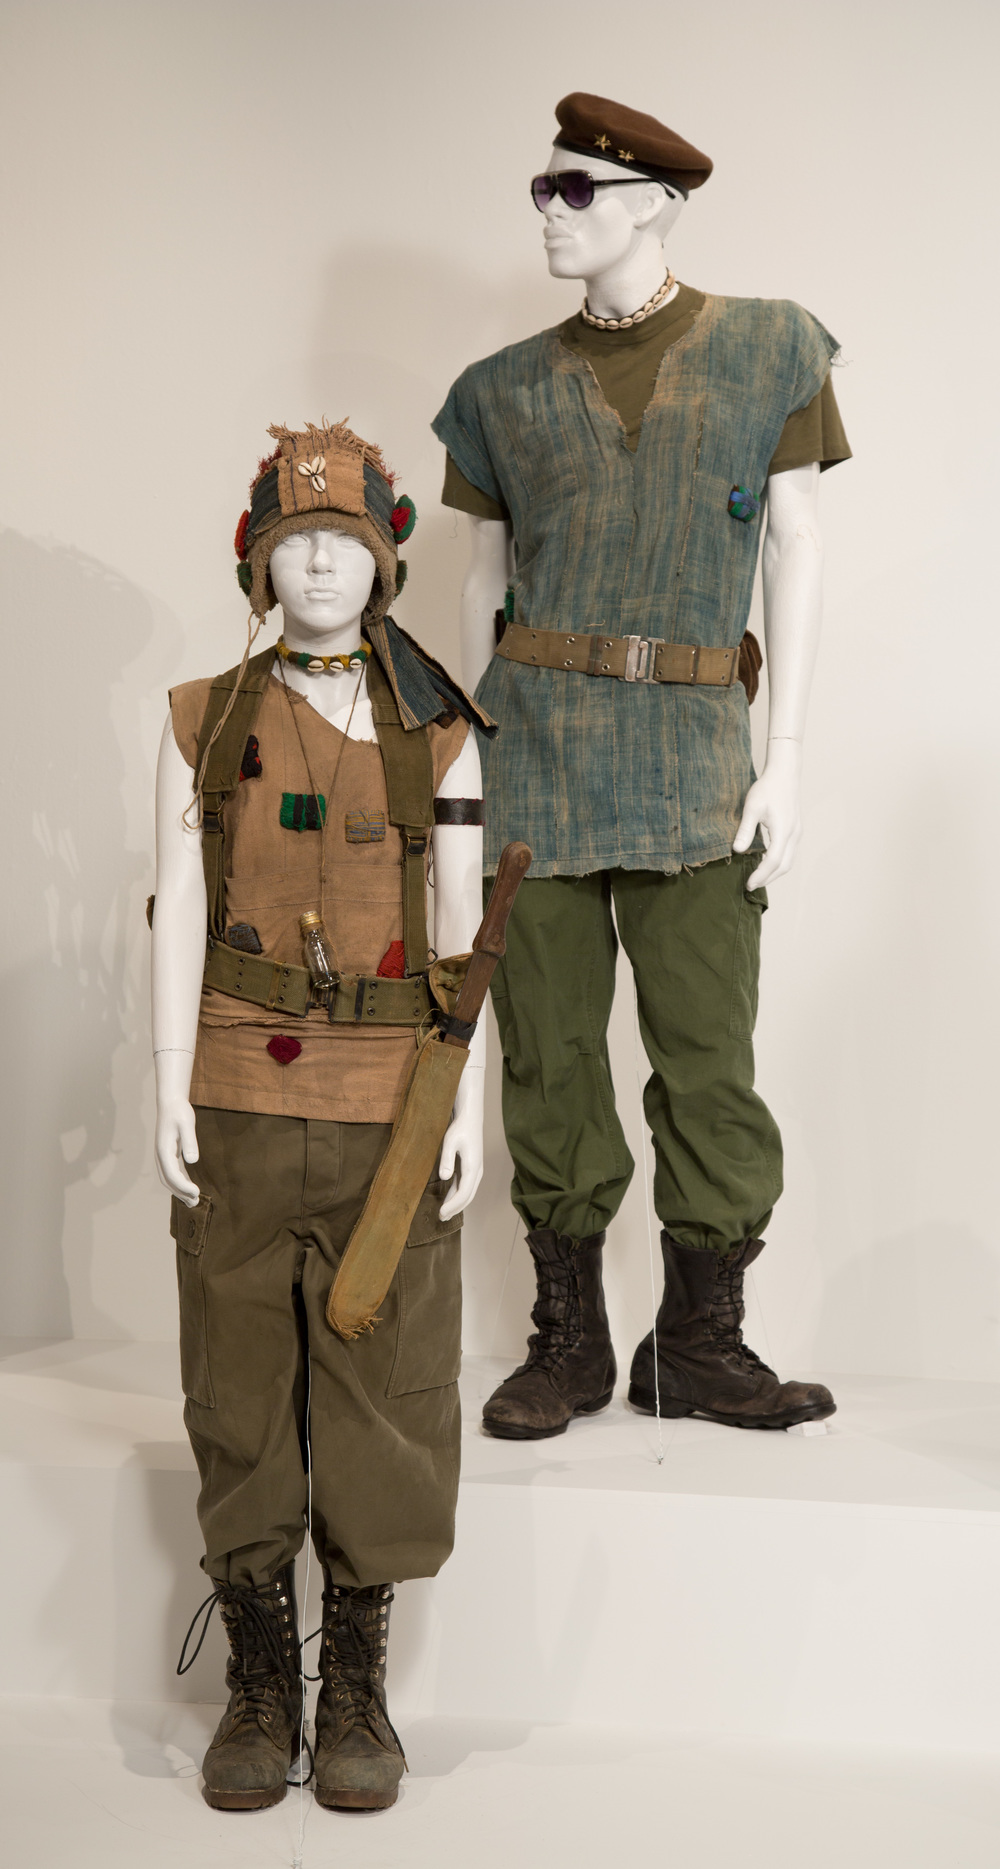  "Beasts Of No Nation"&nbsp;costumes by Costume Designer, Jenny Eagan. These costumes can be seen in the 24th Annual "Art of Motion Picture Costume Design" exhibition, FIDM Museum, Fashion Institute of Design &amp; Merchandising, Los Angeles. The exh